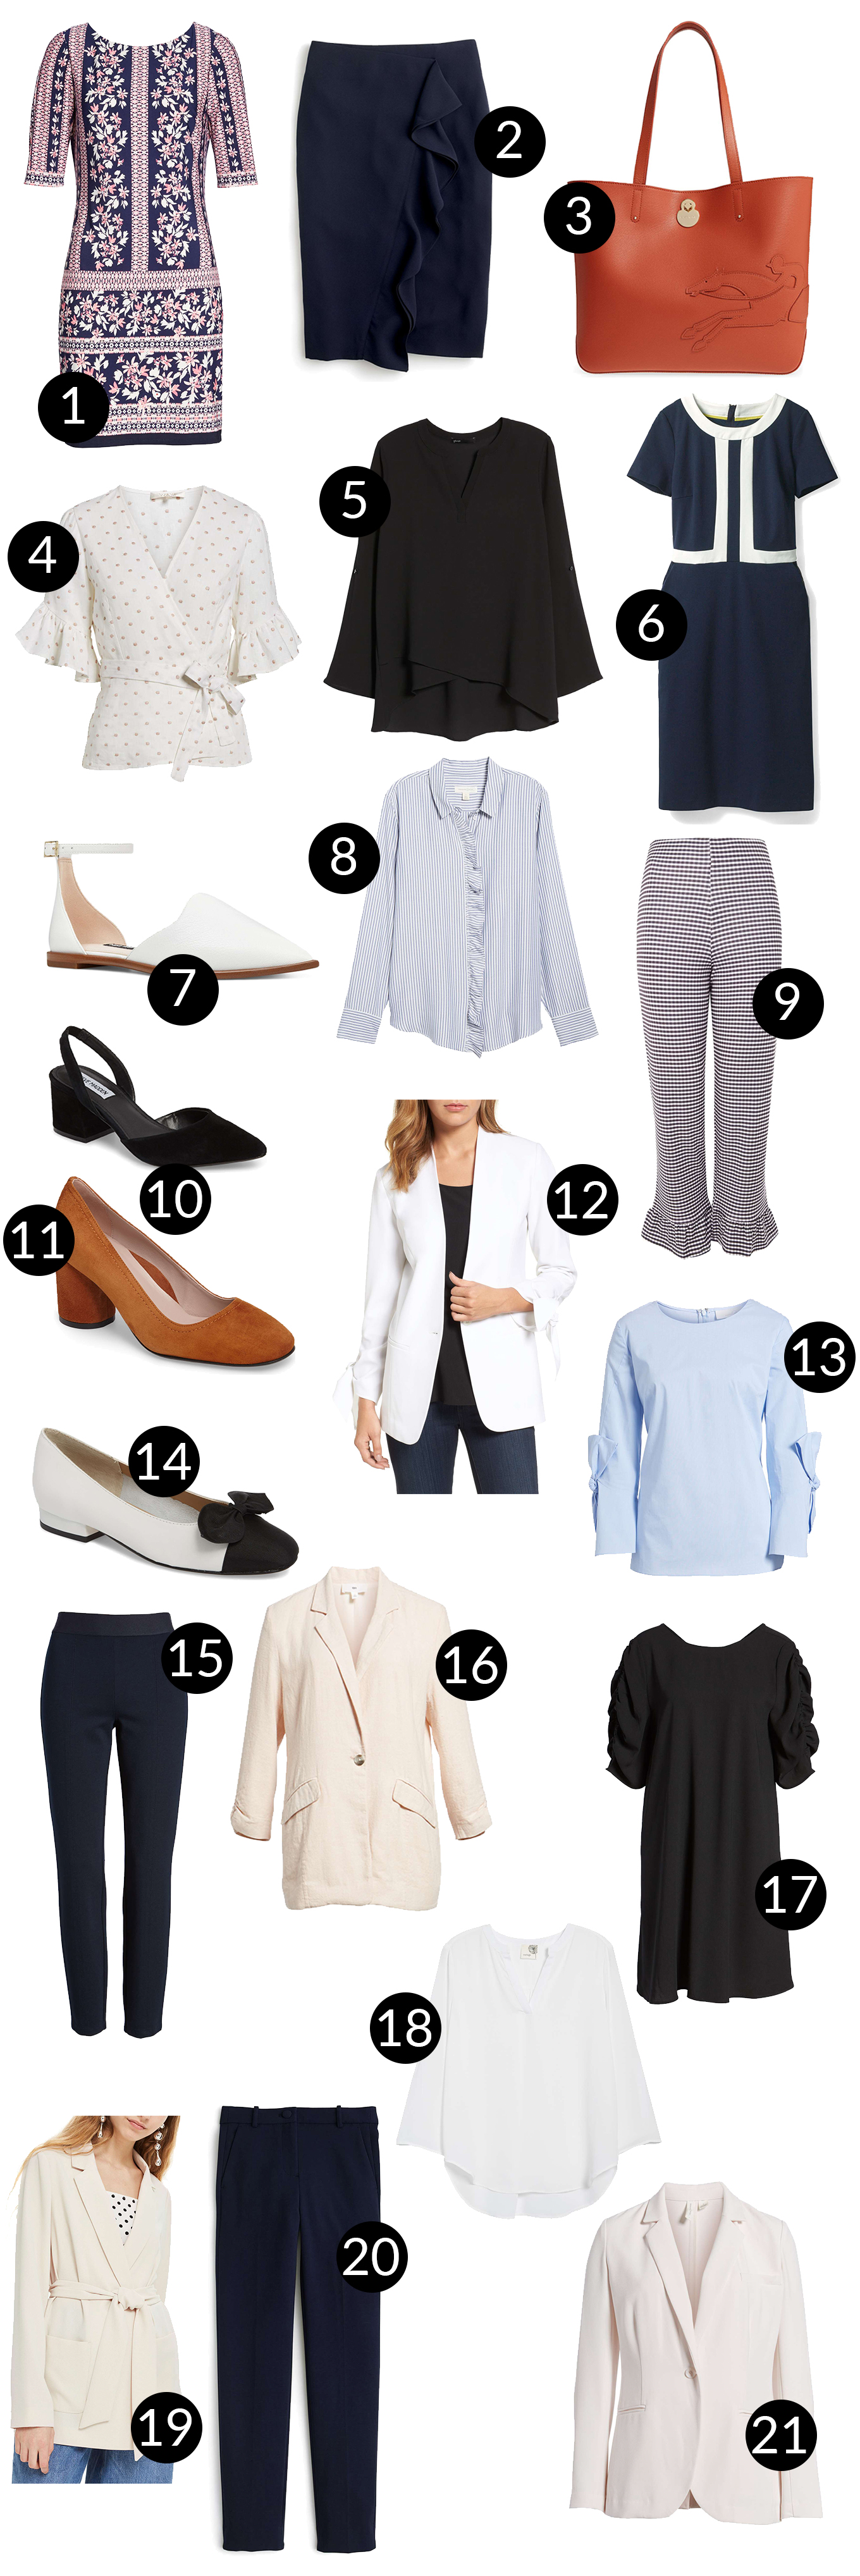 The Ultimate Guide to the Nordstrom Half Yearly Sale: What to Buy